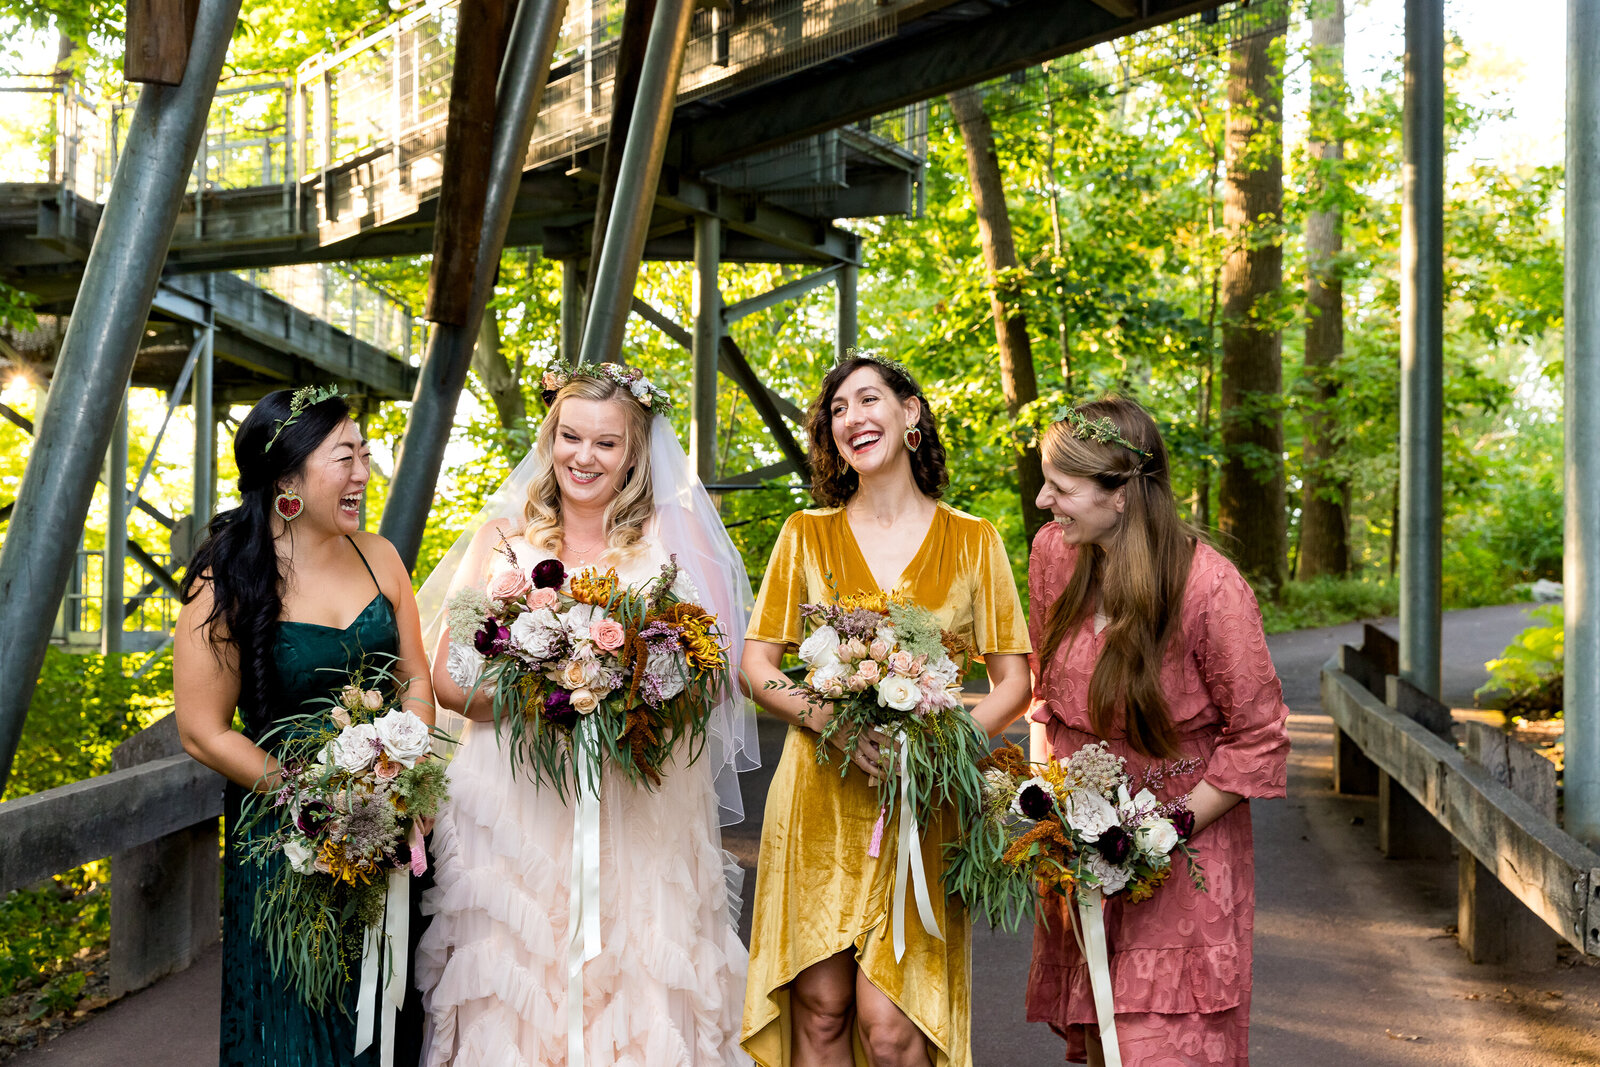 A photo capturing three bridesmaids and the bride laughing together, in a half-circle in a garden setting in Philadelphia.